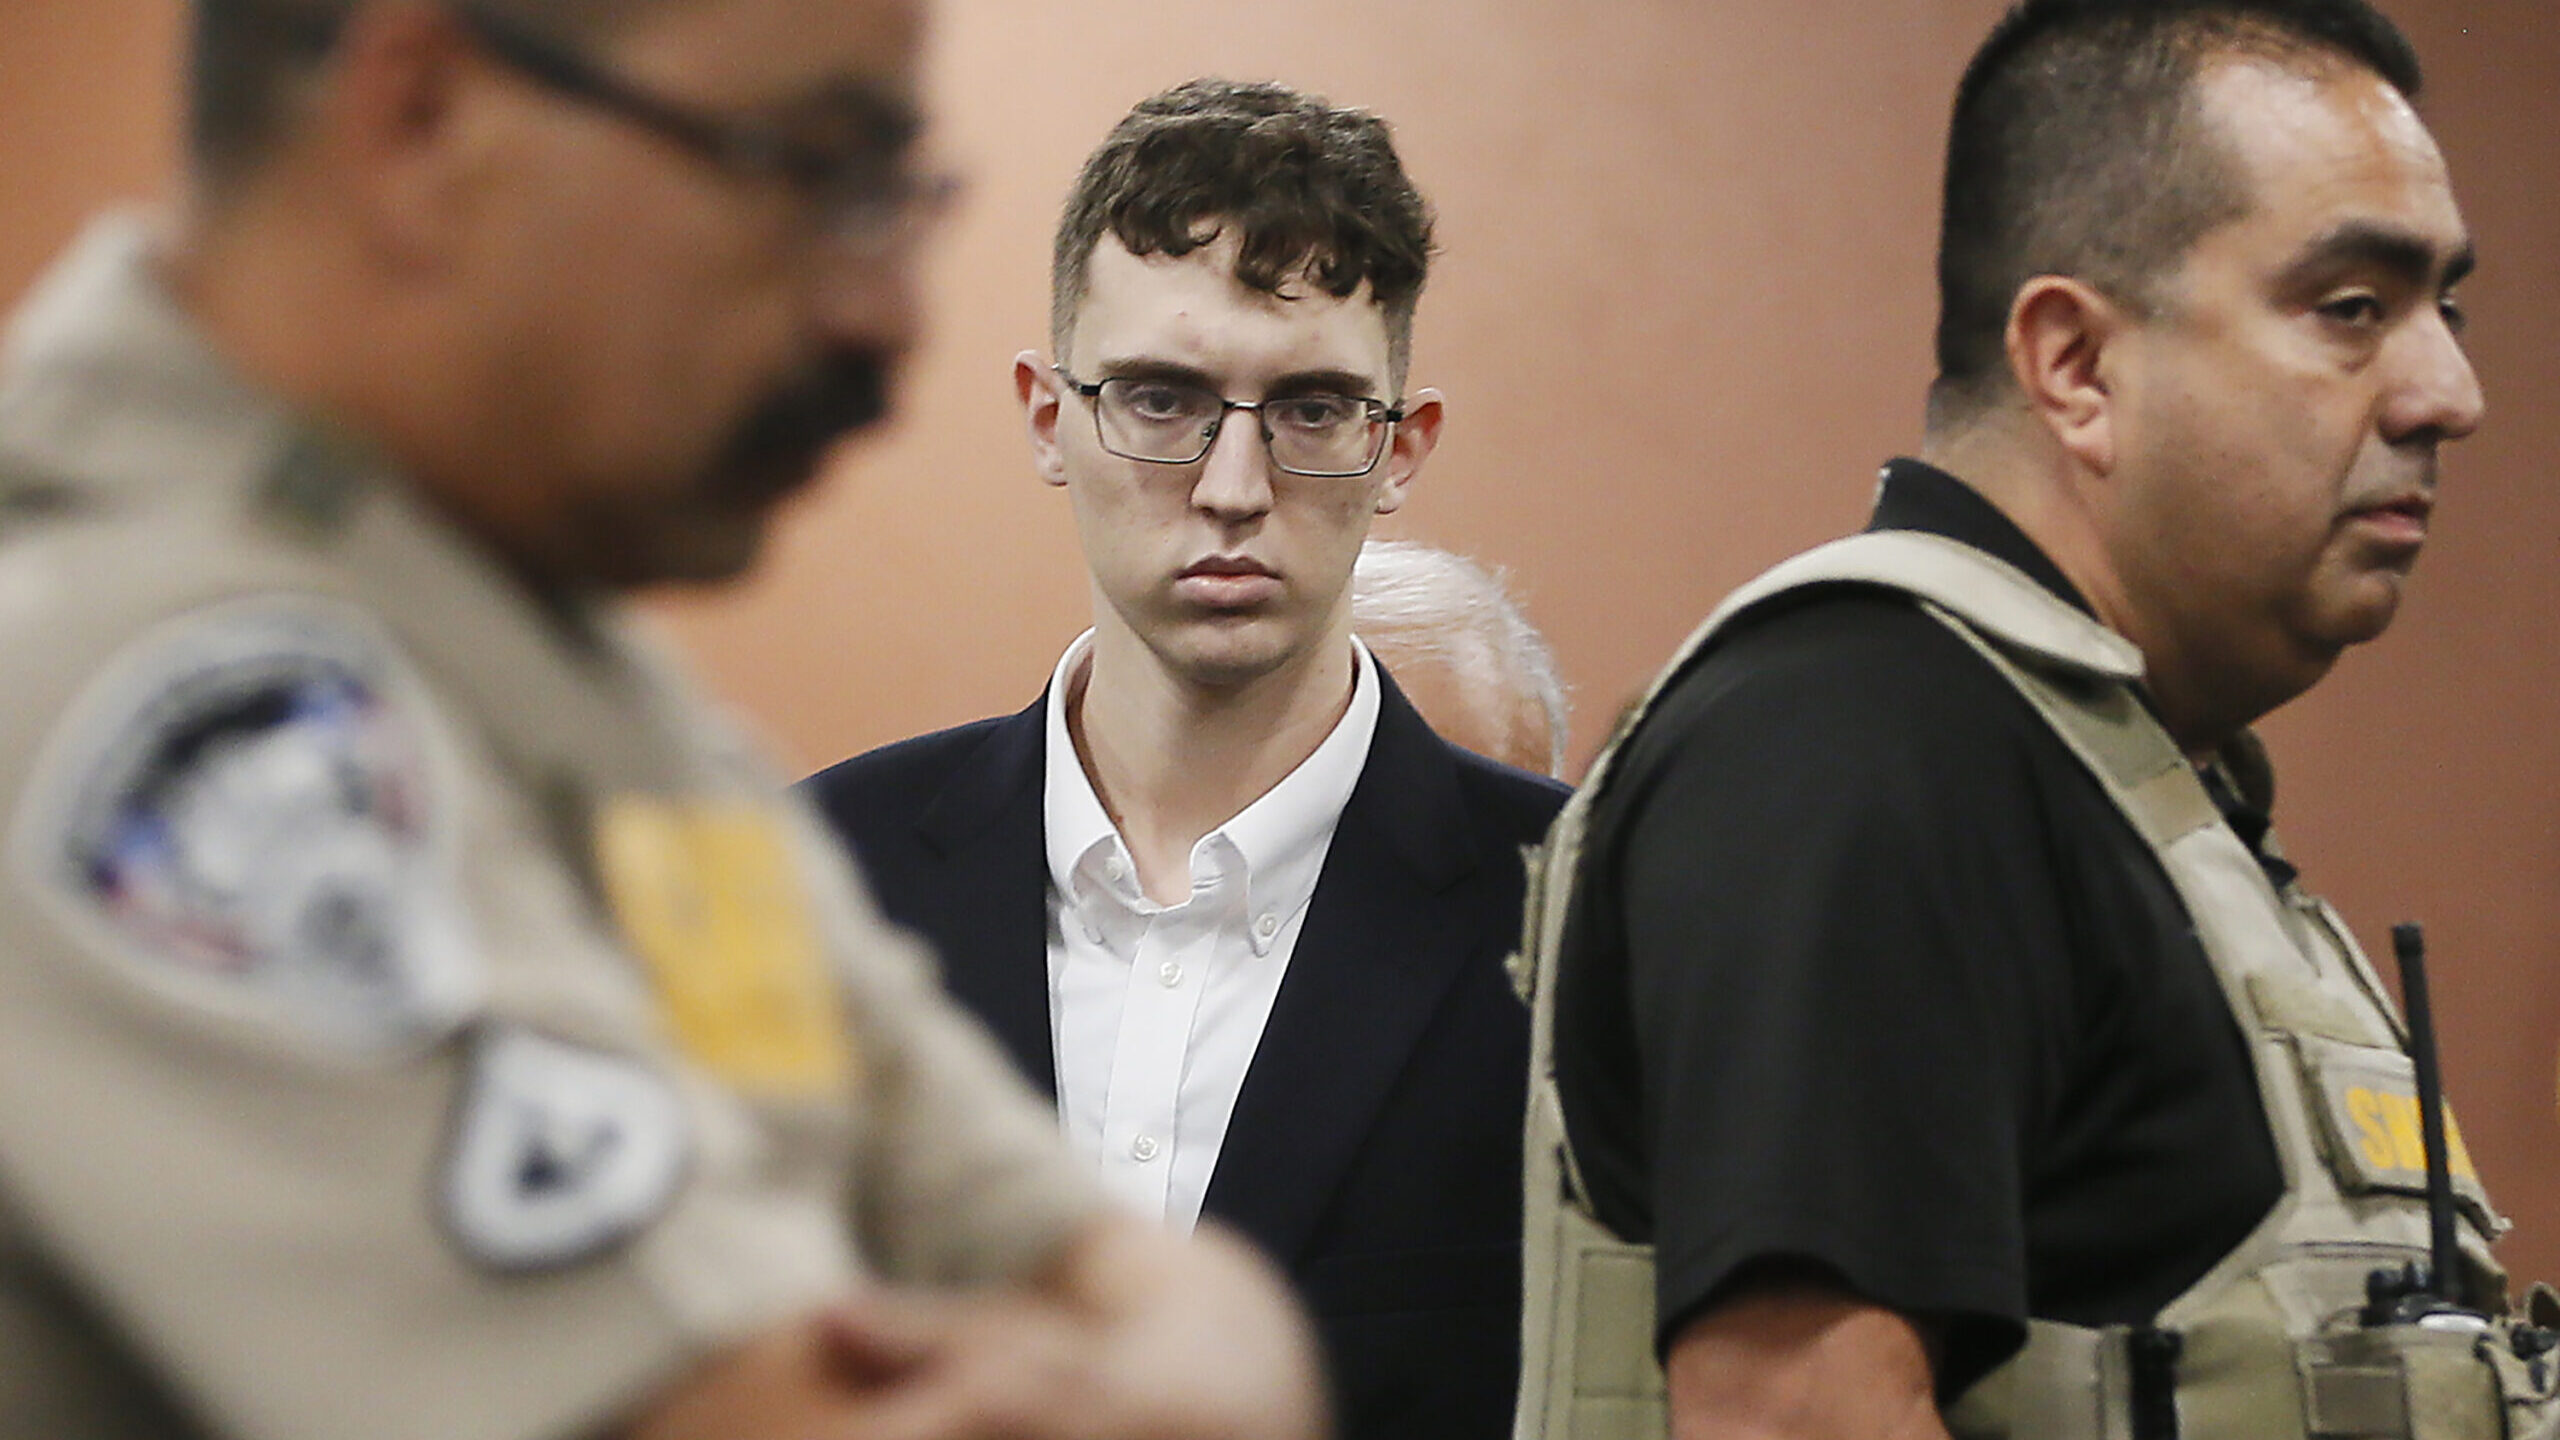 EL PASO, Texas (AP) — A white gunman who killed 23 people in a racist attack on Hispanic shoppers...